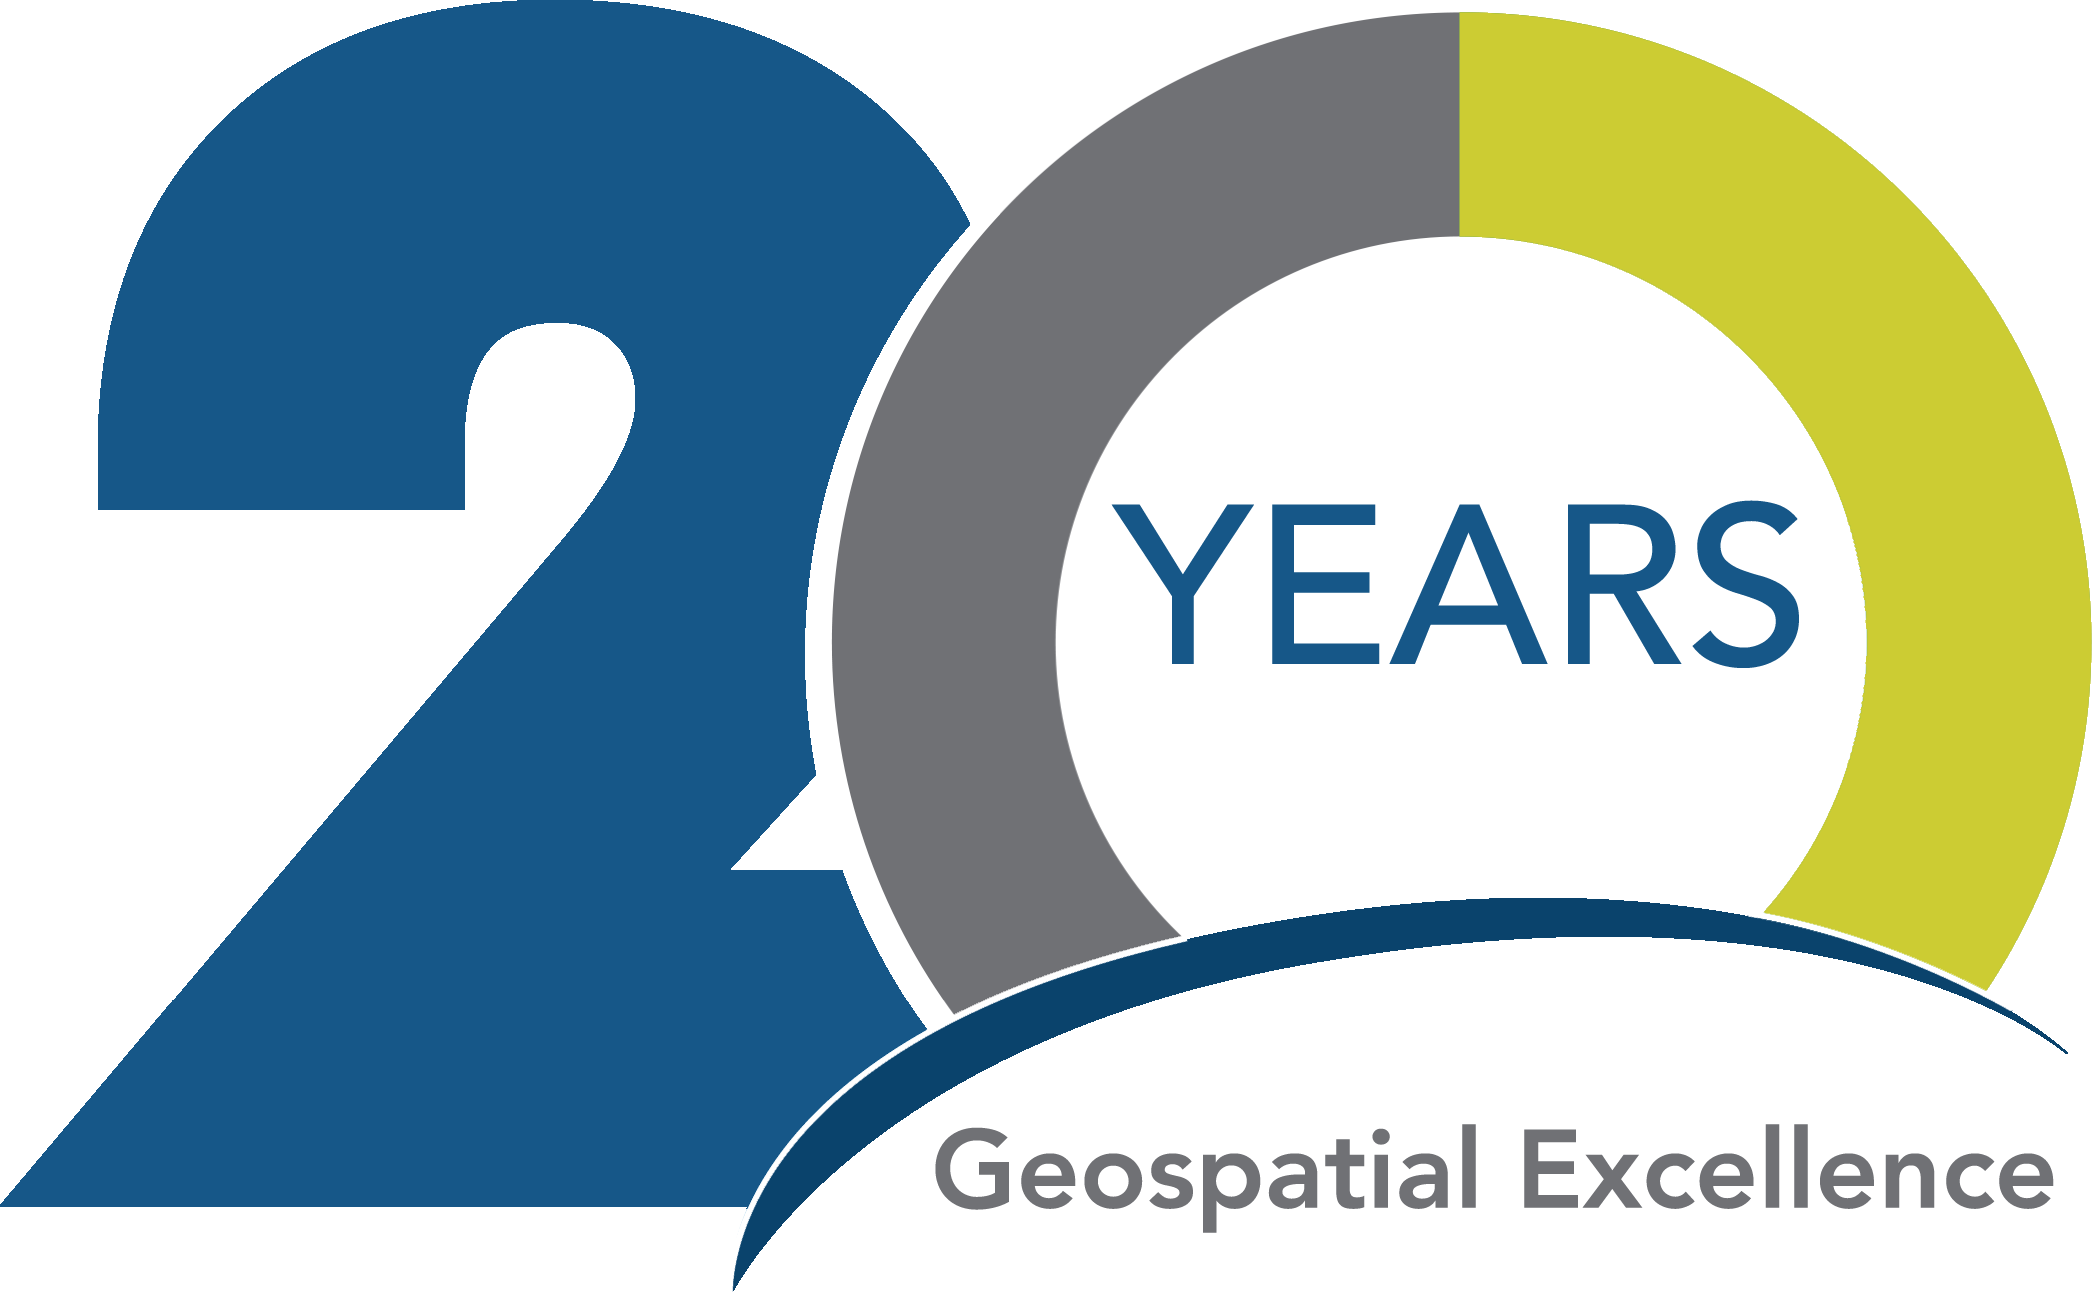 Celebrating 20 years of GIS excellence